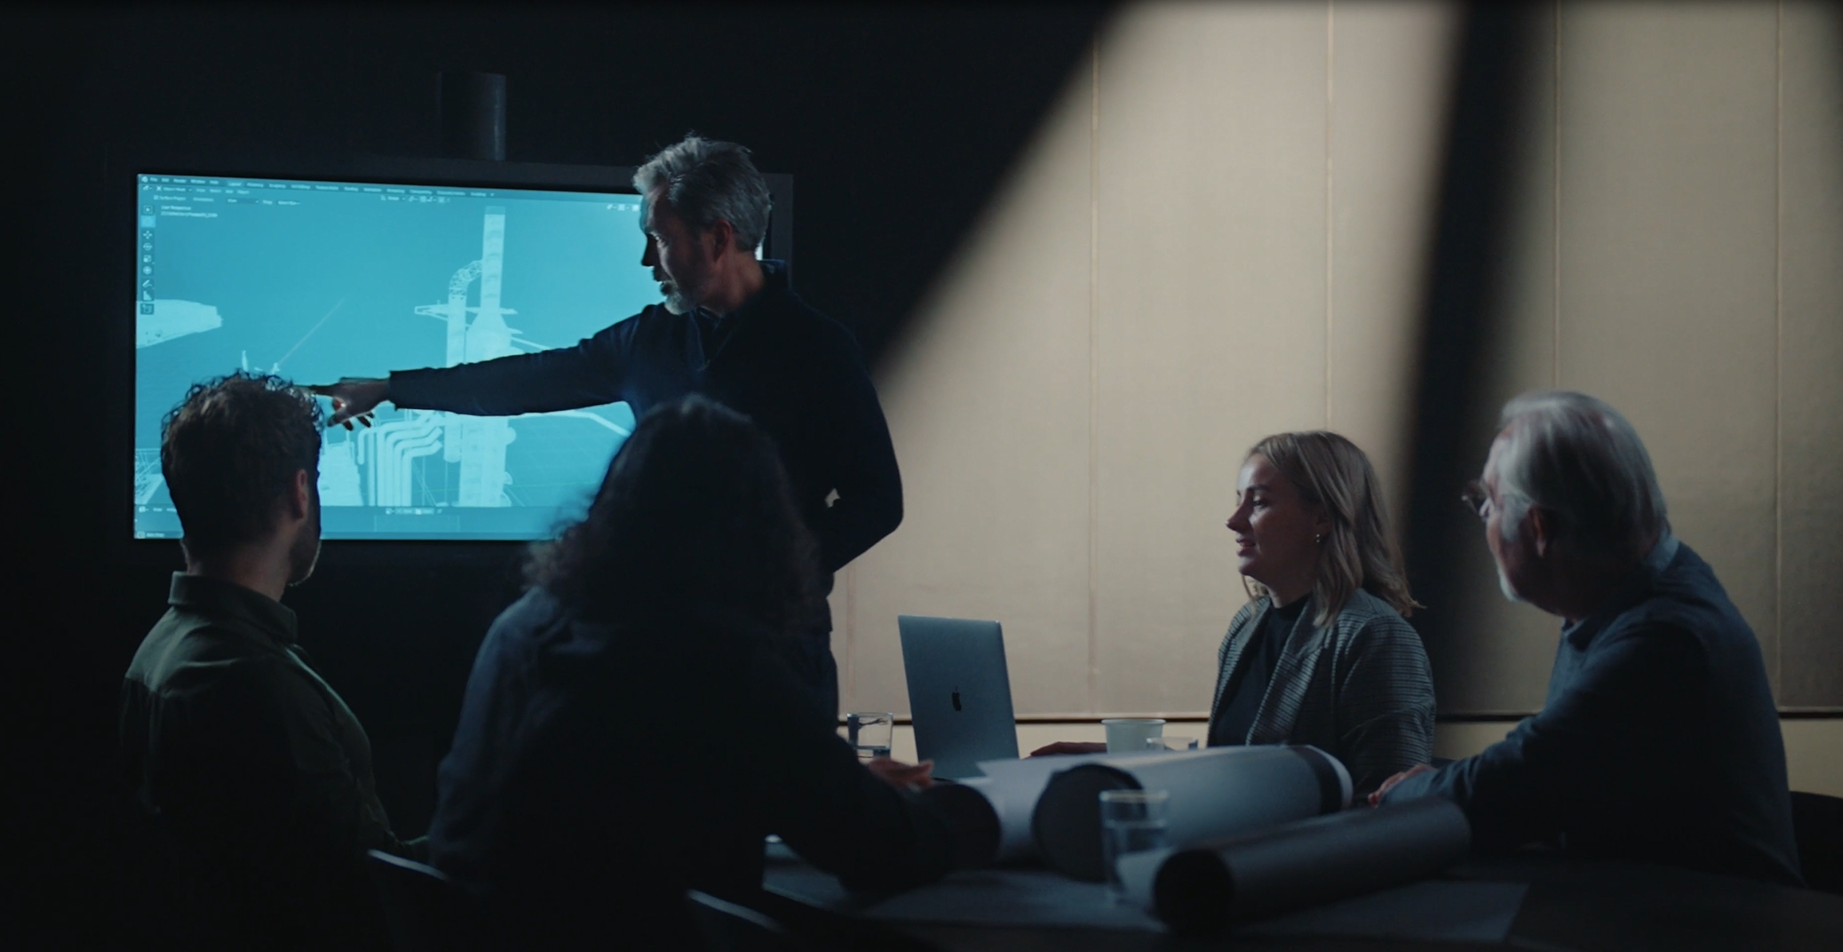 A man points to a monitor in a darkened room to explain something to the other people present